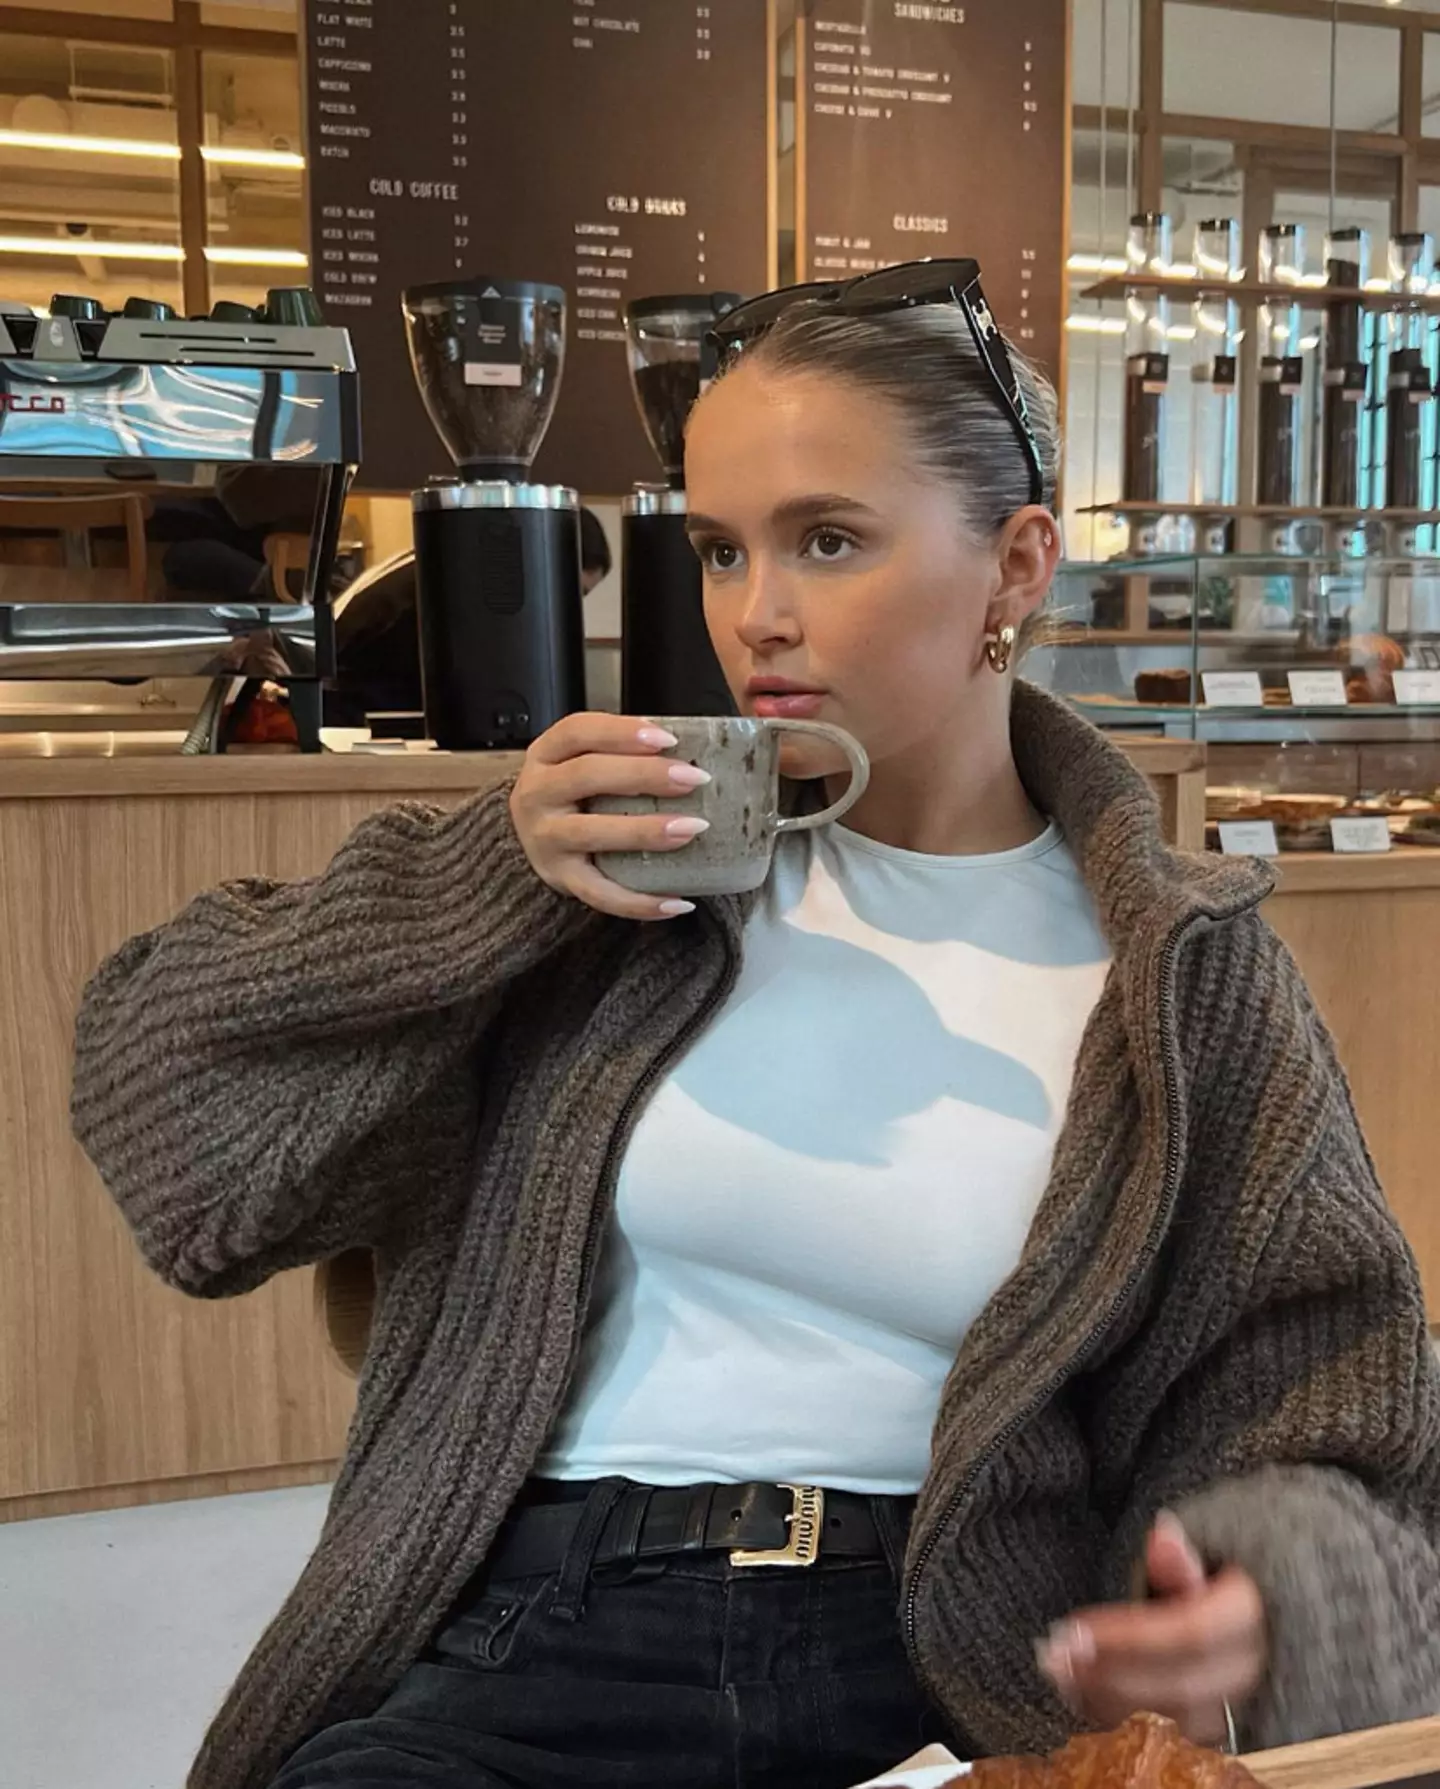 Some people took issue with the former Love Island star commenting on getting an 'overpriced' coffee.